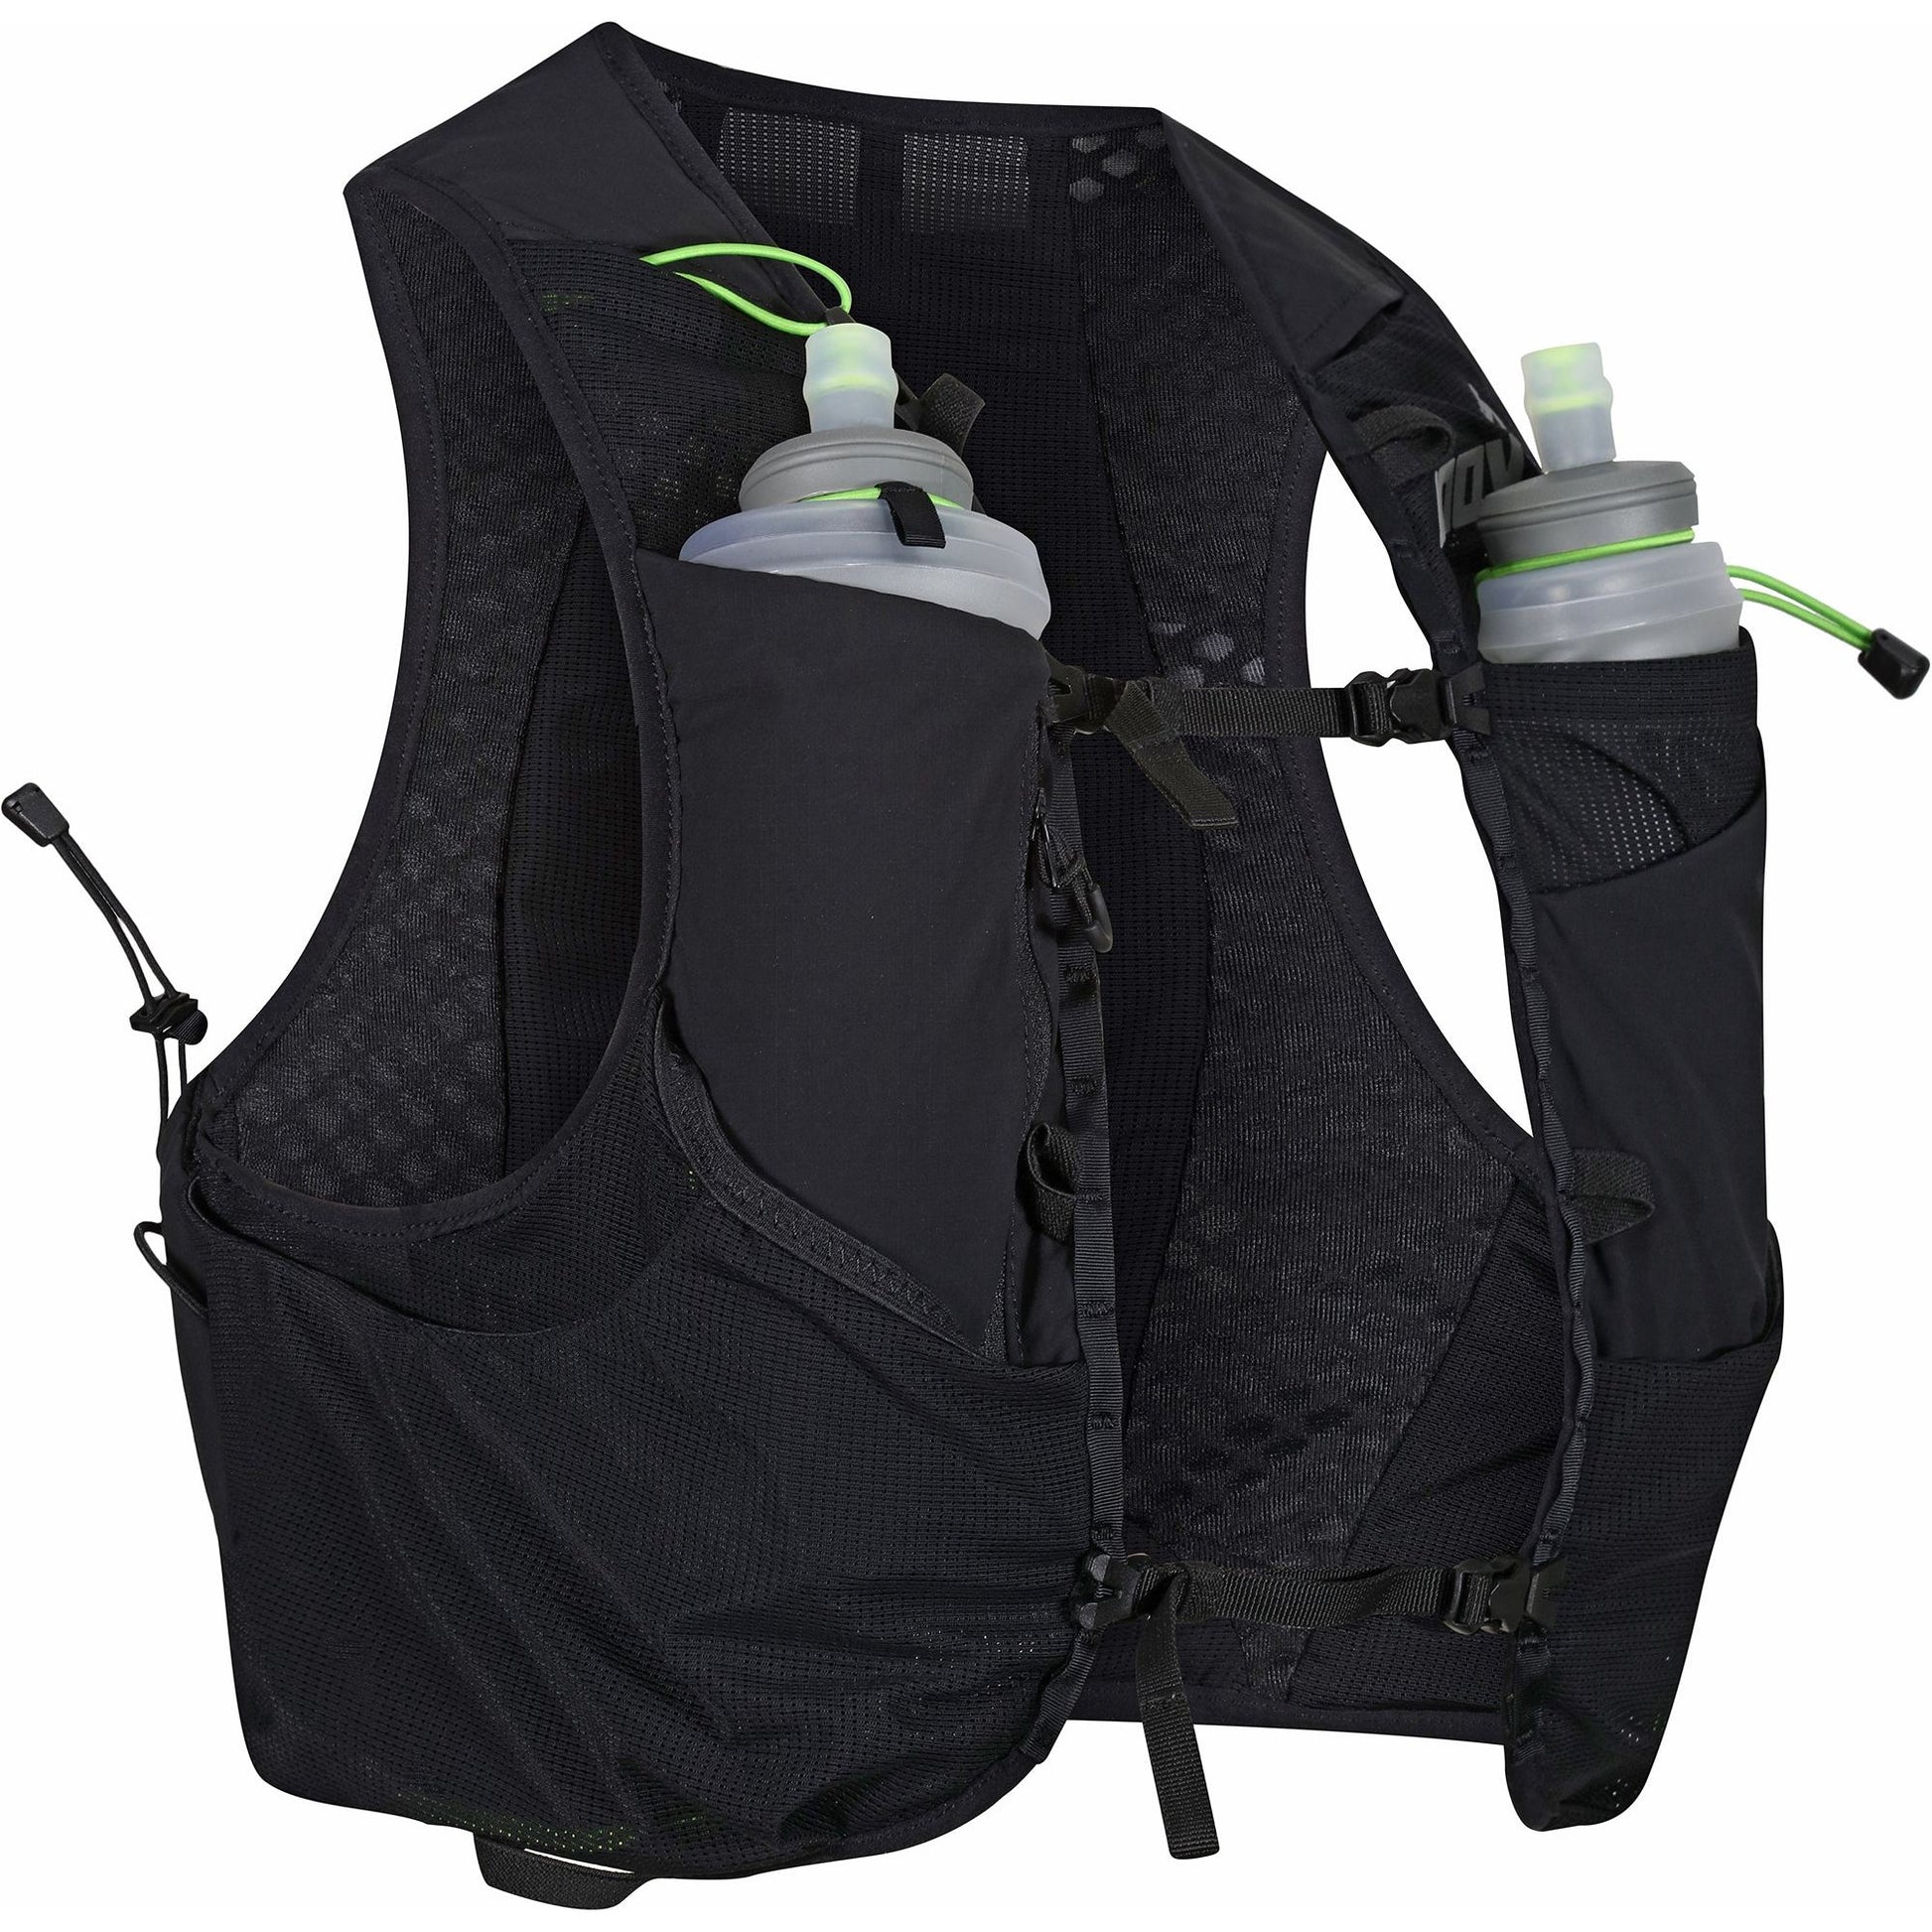 Inov8 Ultrapac Pro In Backpack Bkgn Side - Side View